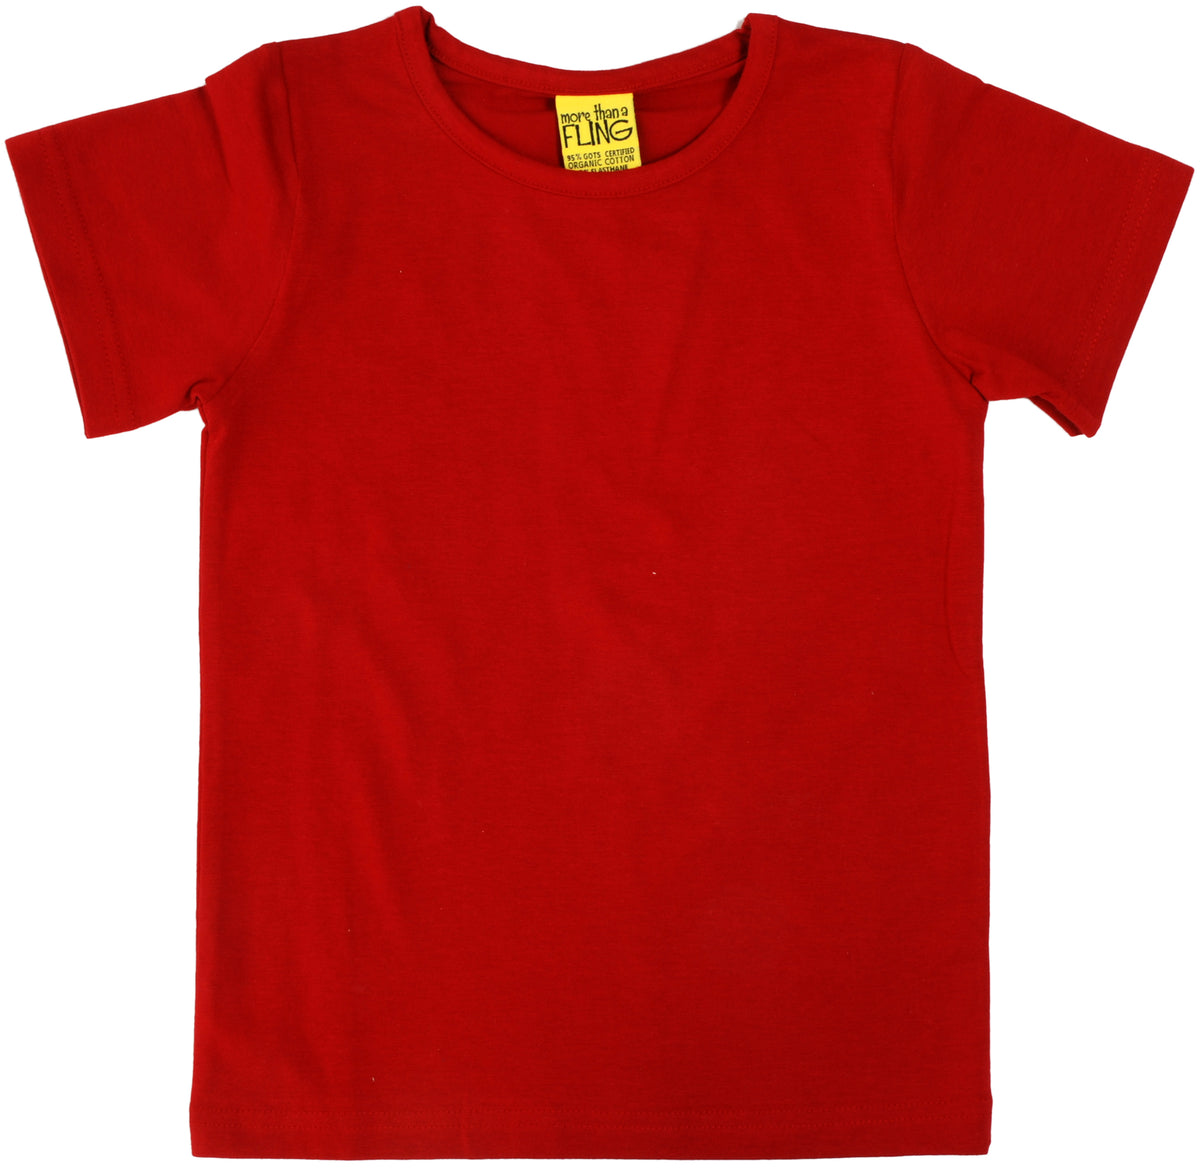 More Than A Fling T Shirt Pompein Red - Donker Rood Shirt